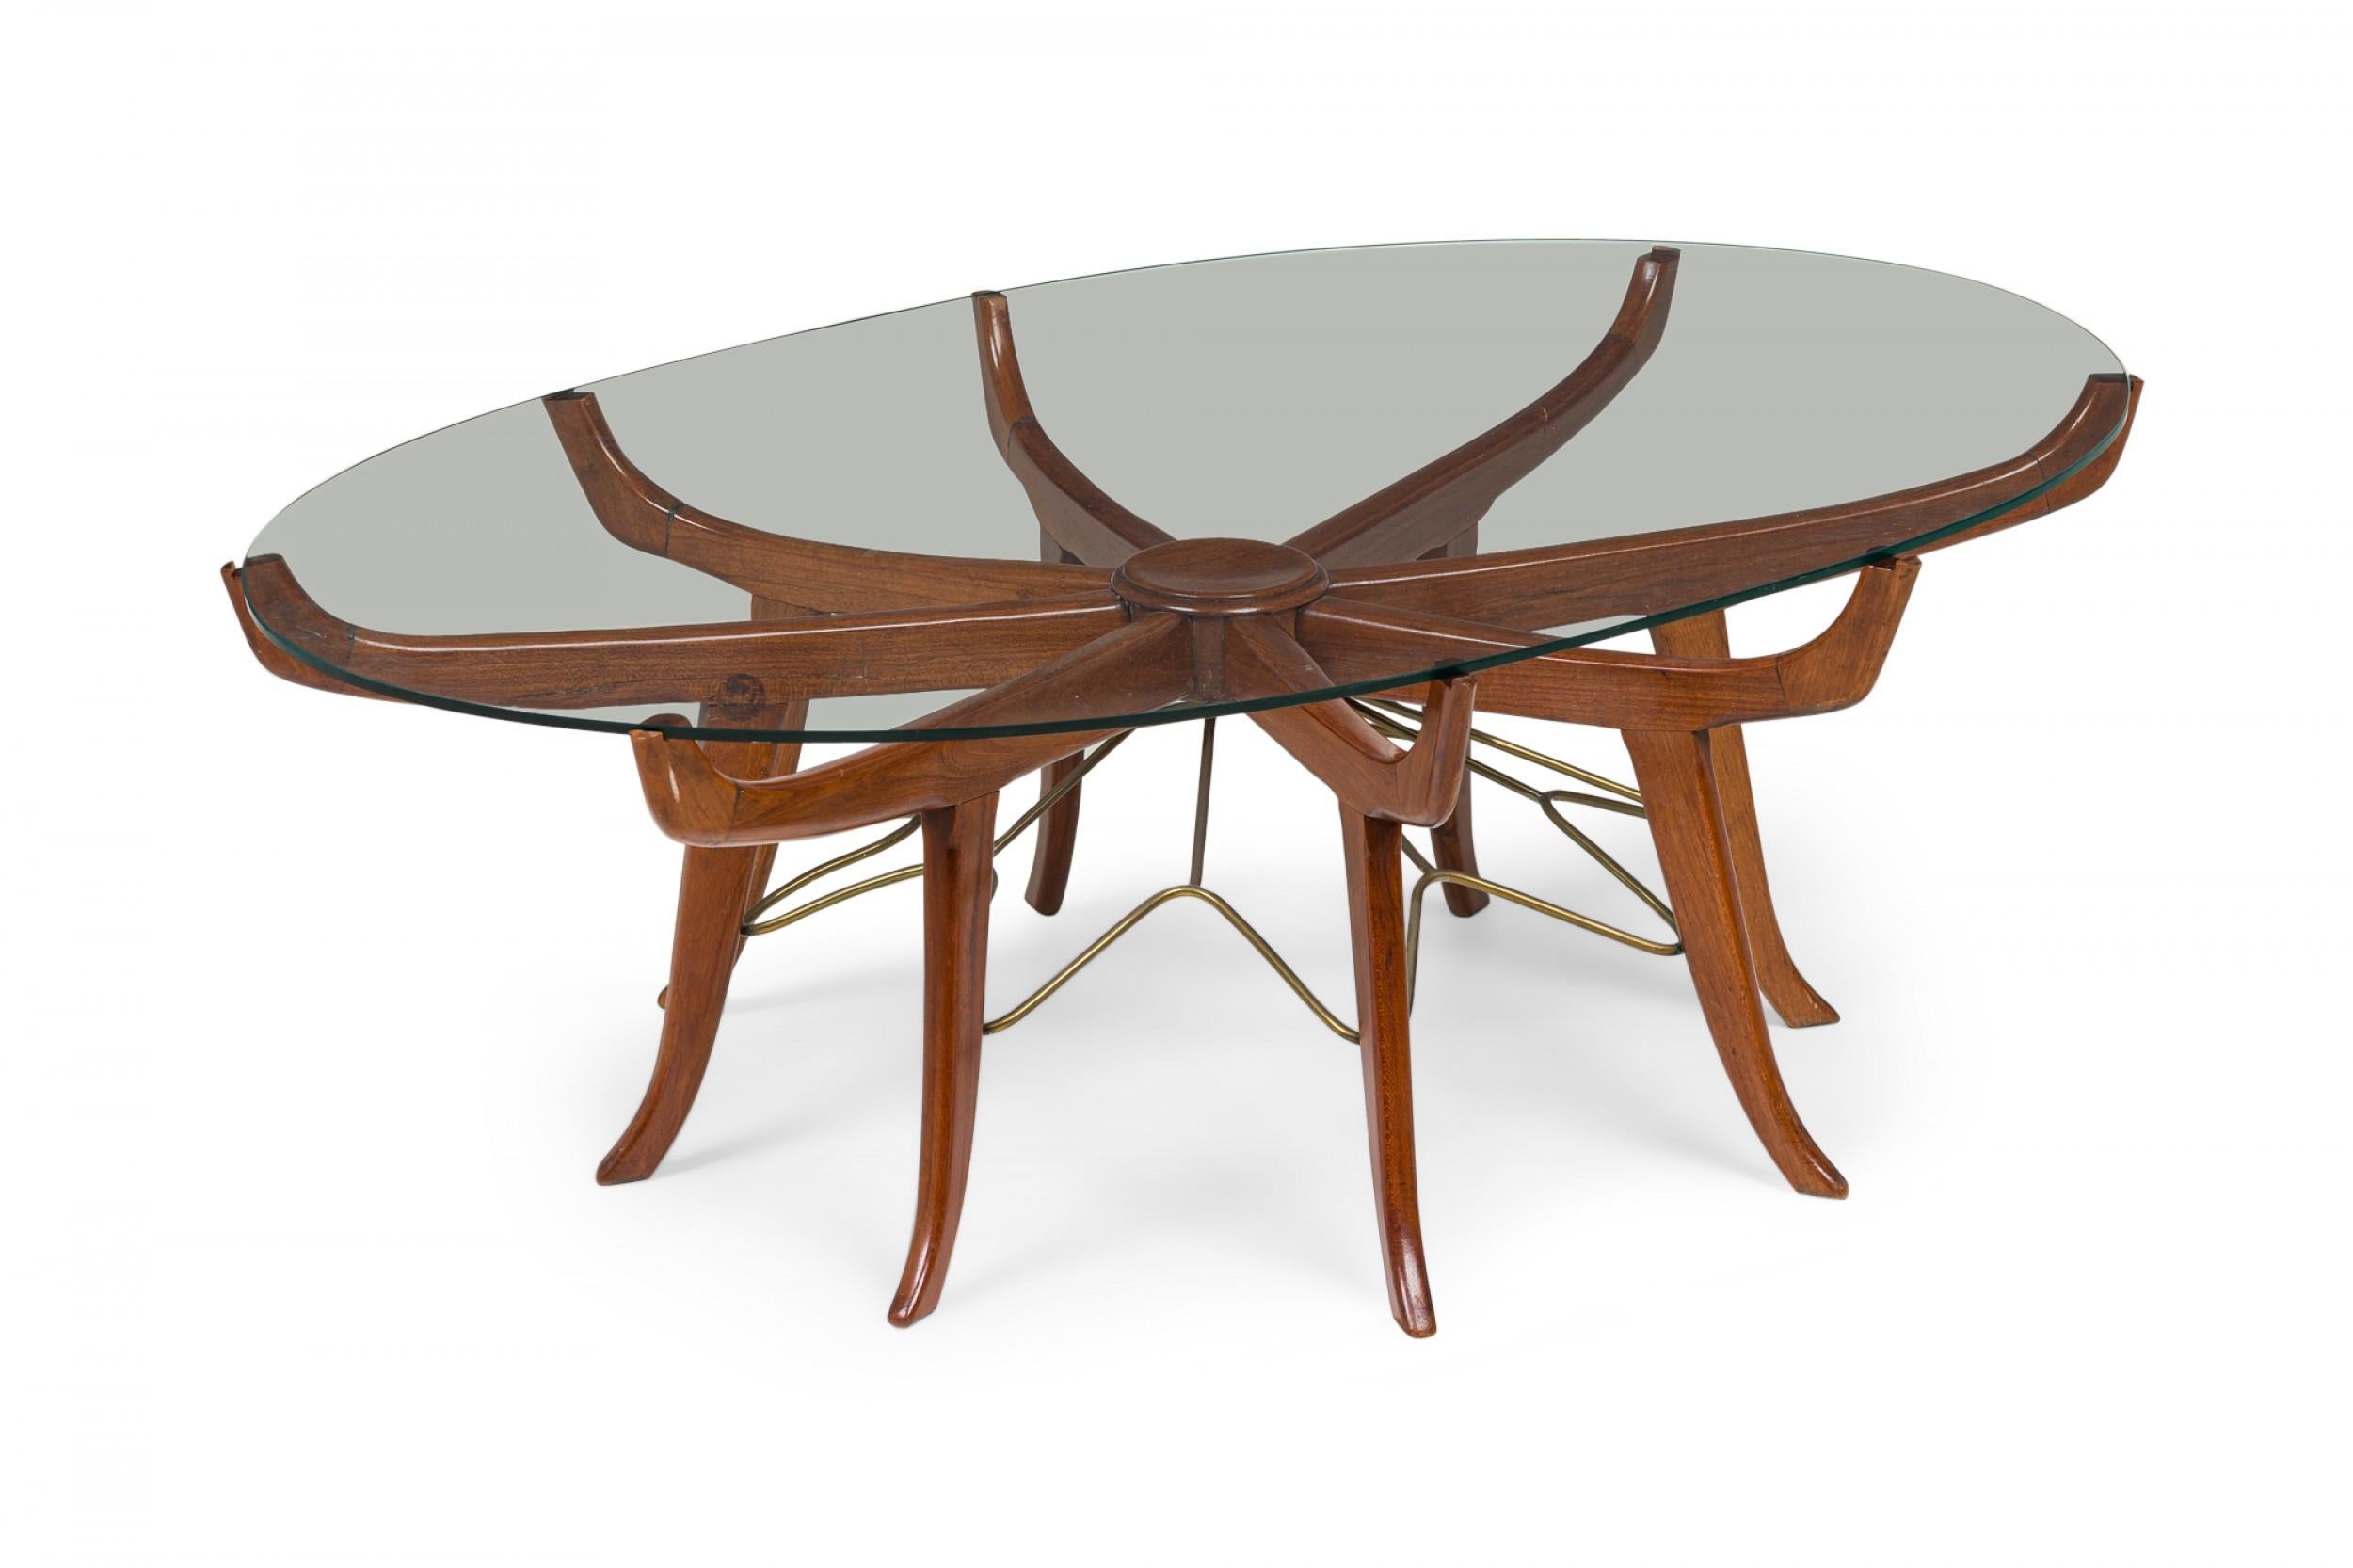 Midcentury Italian Modern Mahogany, Steel & Glass Coffee Table In Good Condition For Sale In New York, NY